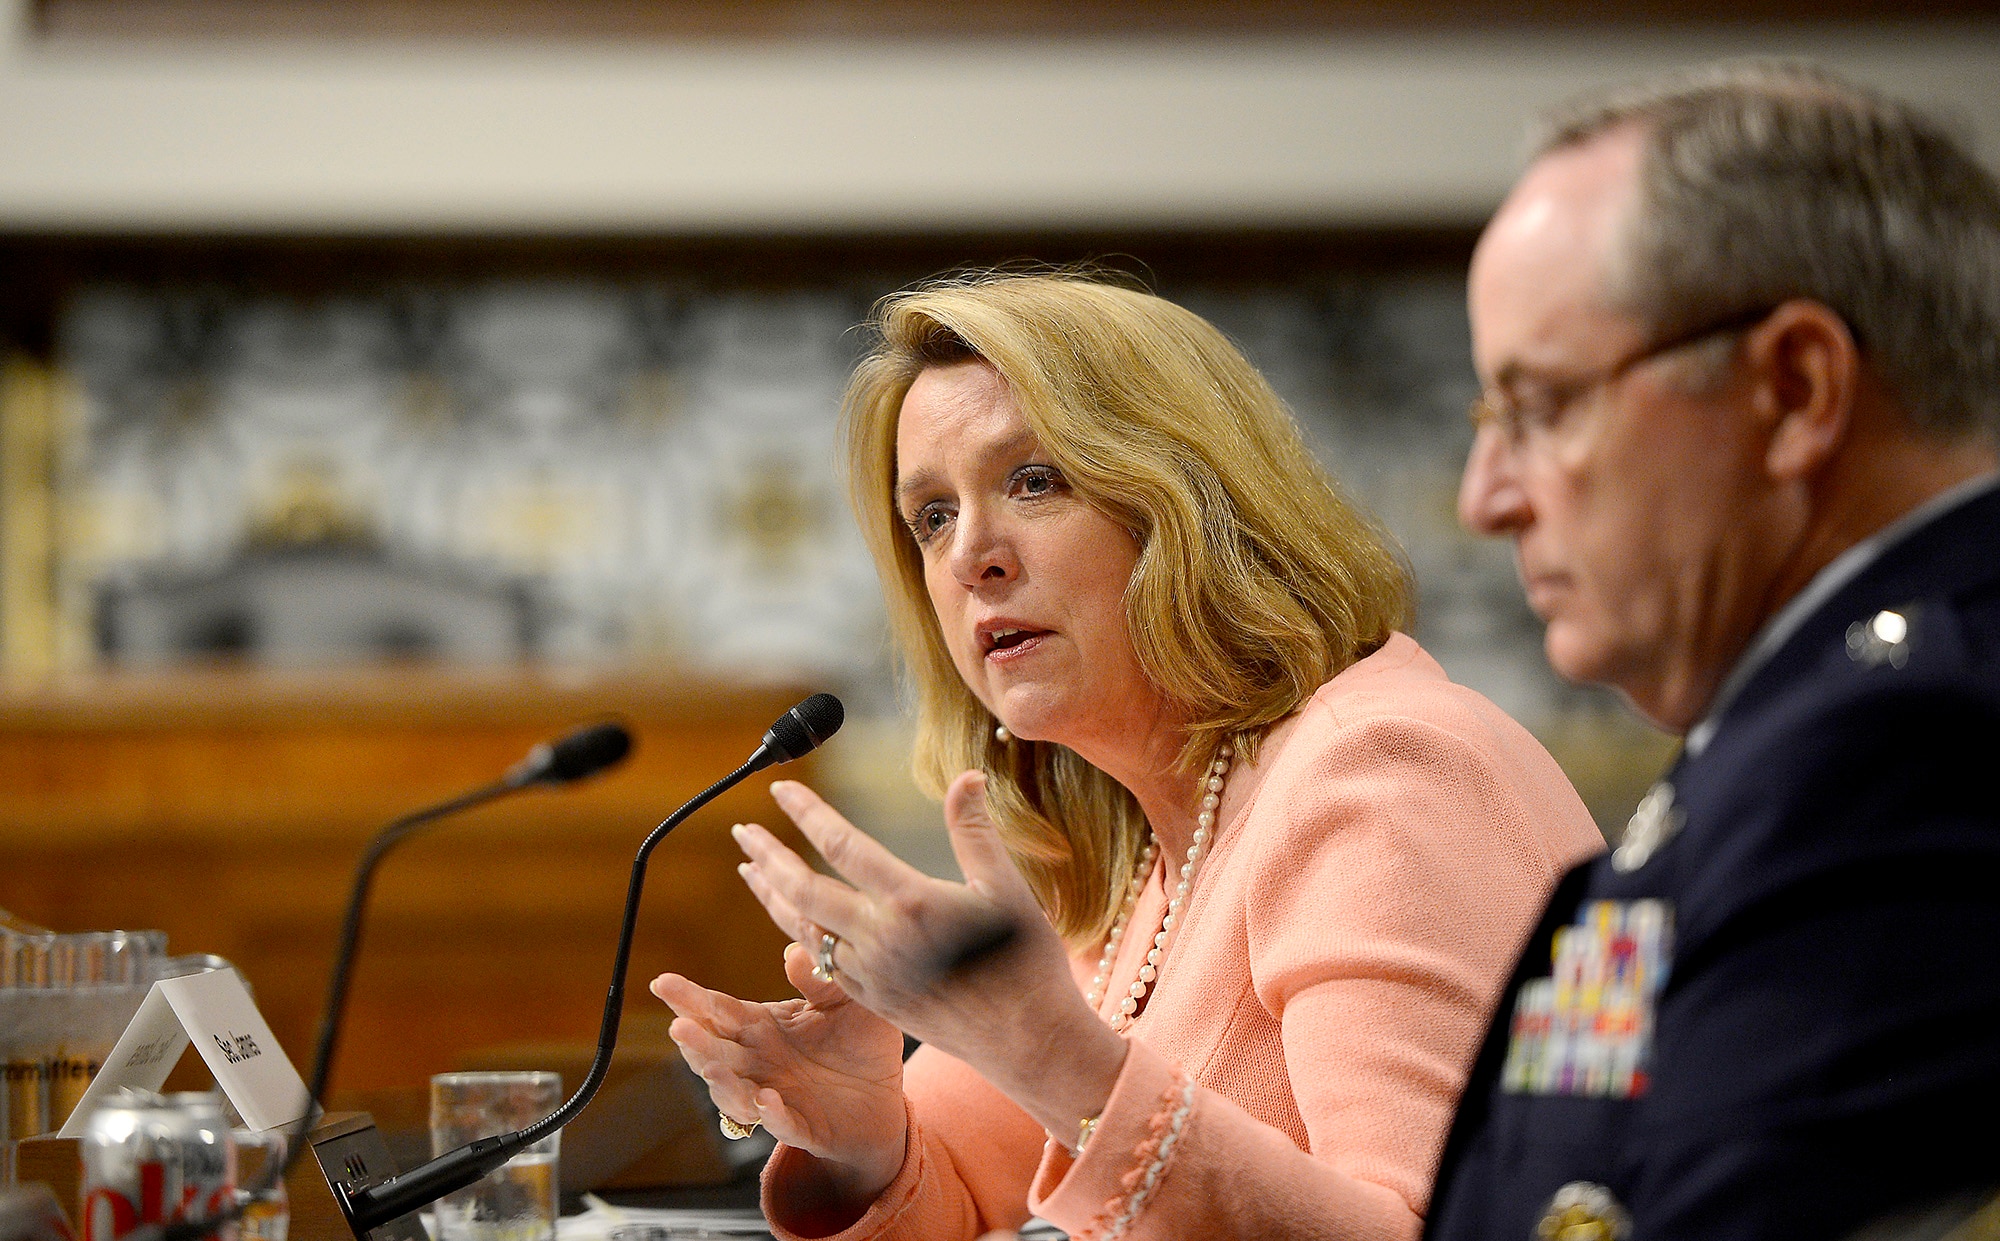 Secretary of the Air Force Deborah Lee James and Air Force Chief of Staff Gen. Mark A. Welsh III present the structure of the Air Force to the Senate Arms Services Committee April 29, 2014, in Washington, D.C.  James and Welsh said the Air Force's future will more fully incorporate personnel from the Reserves and National Guard.  (U.S. Air Force photo/Scott M. Ash)